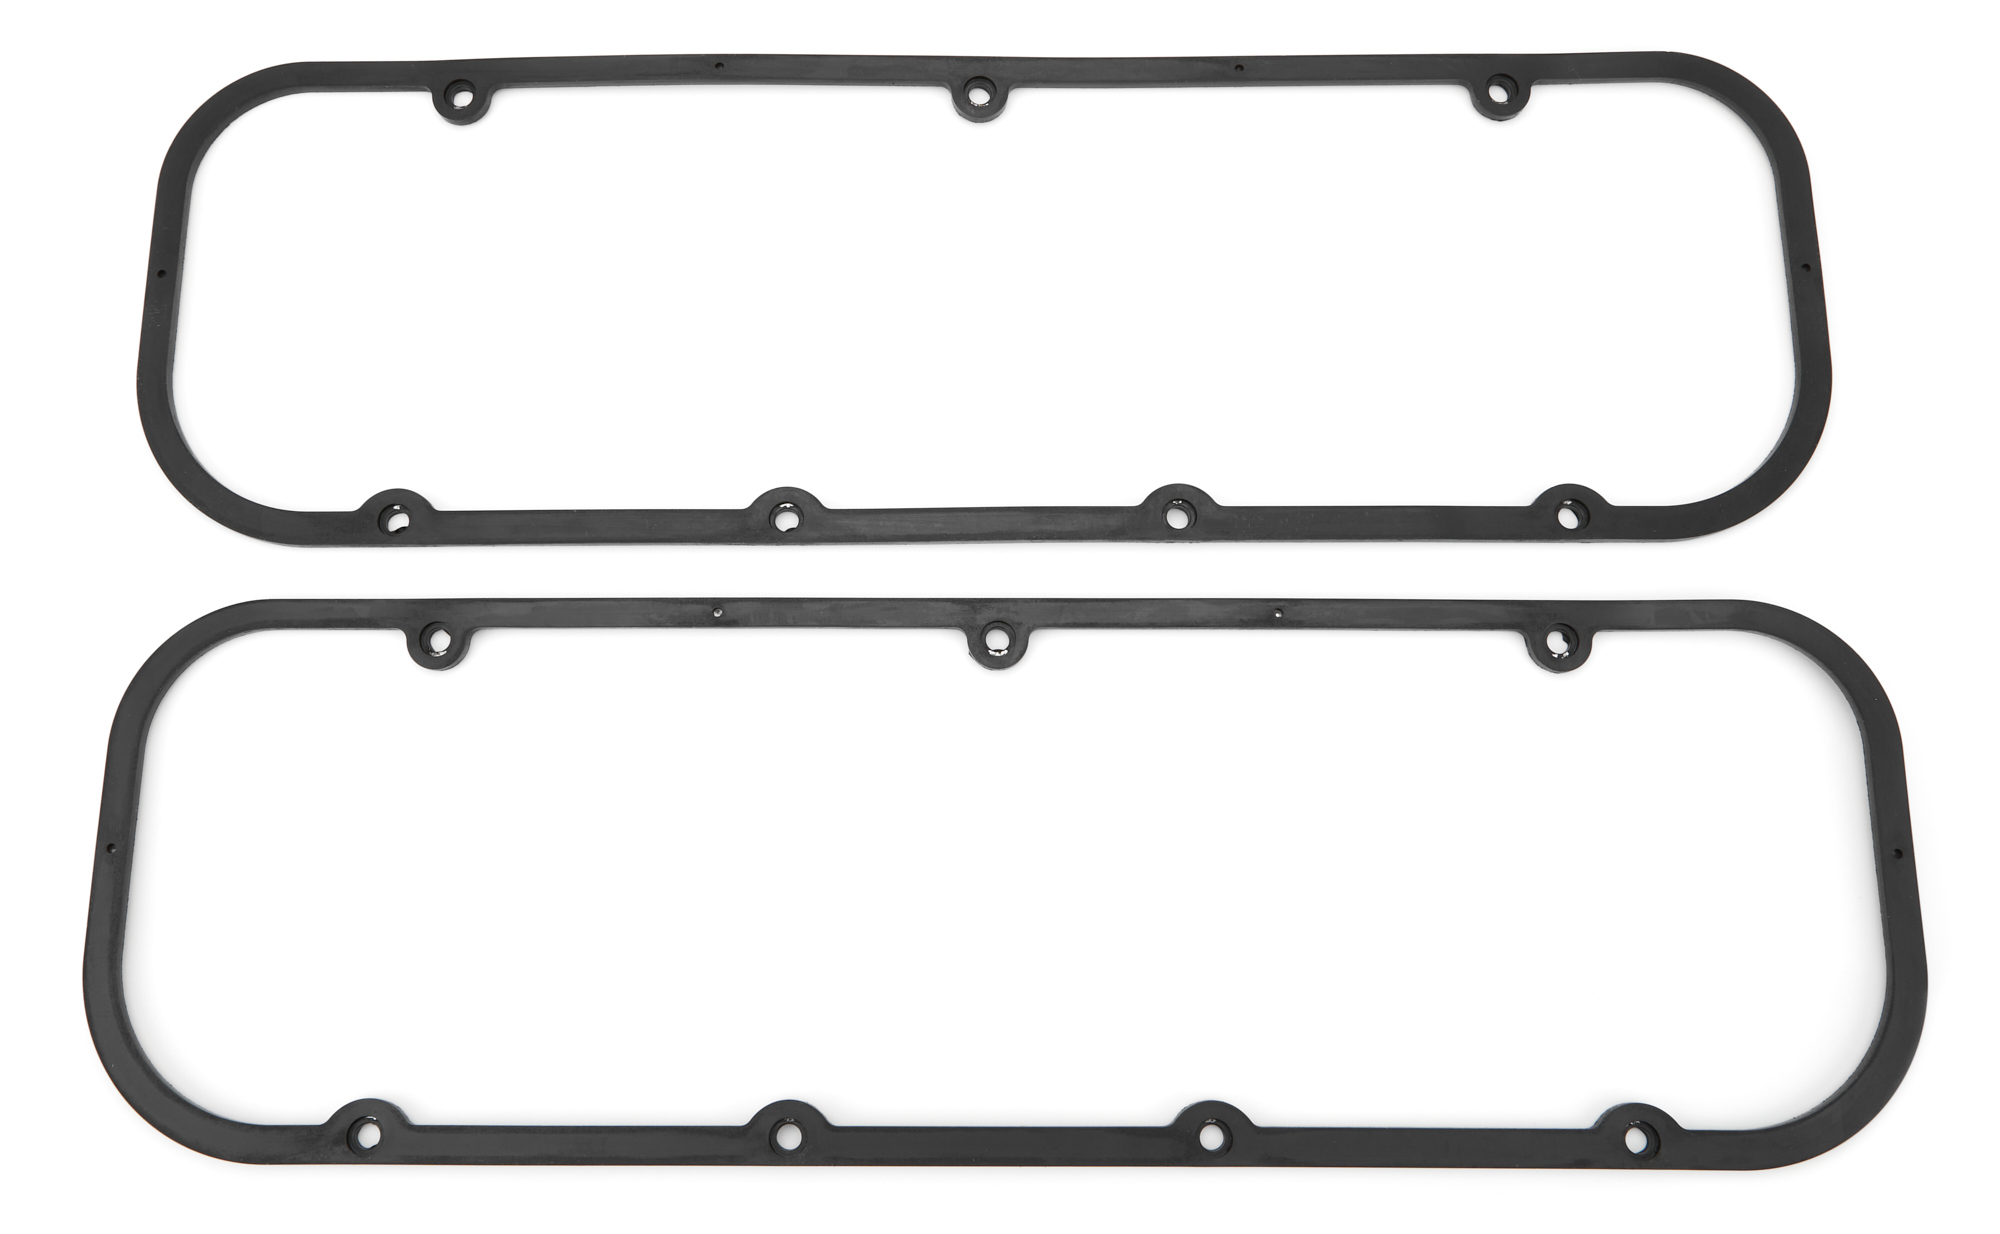 Black Rubber BB Chevy Valve Cover Gaskets Pair